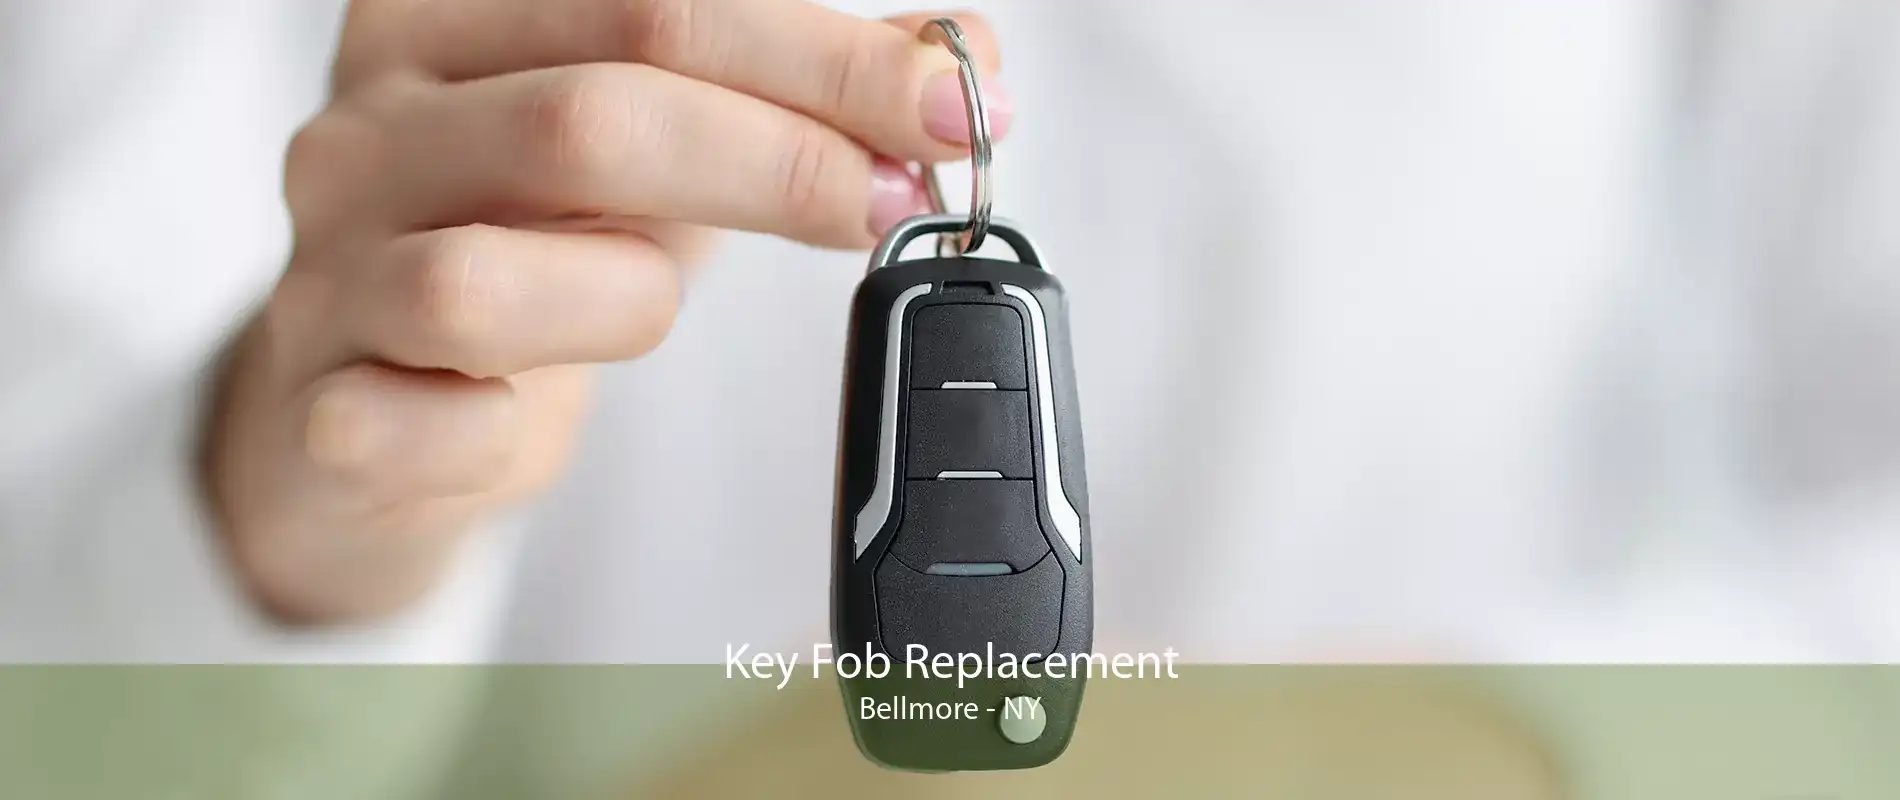 Key Fob Replacement Bellmore - NY